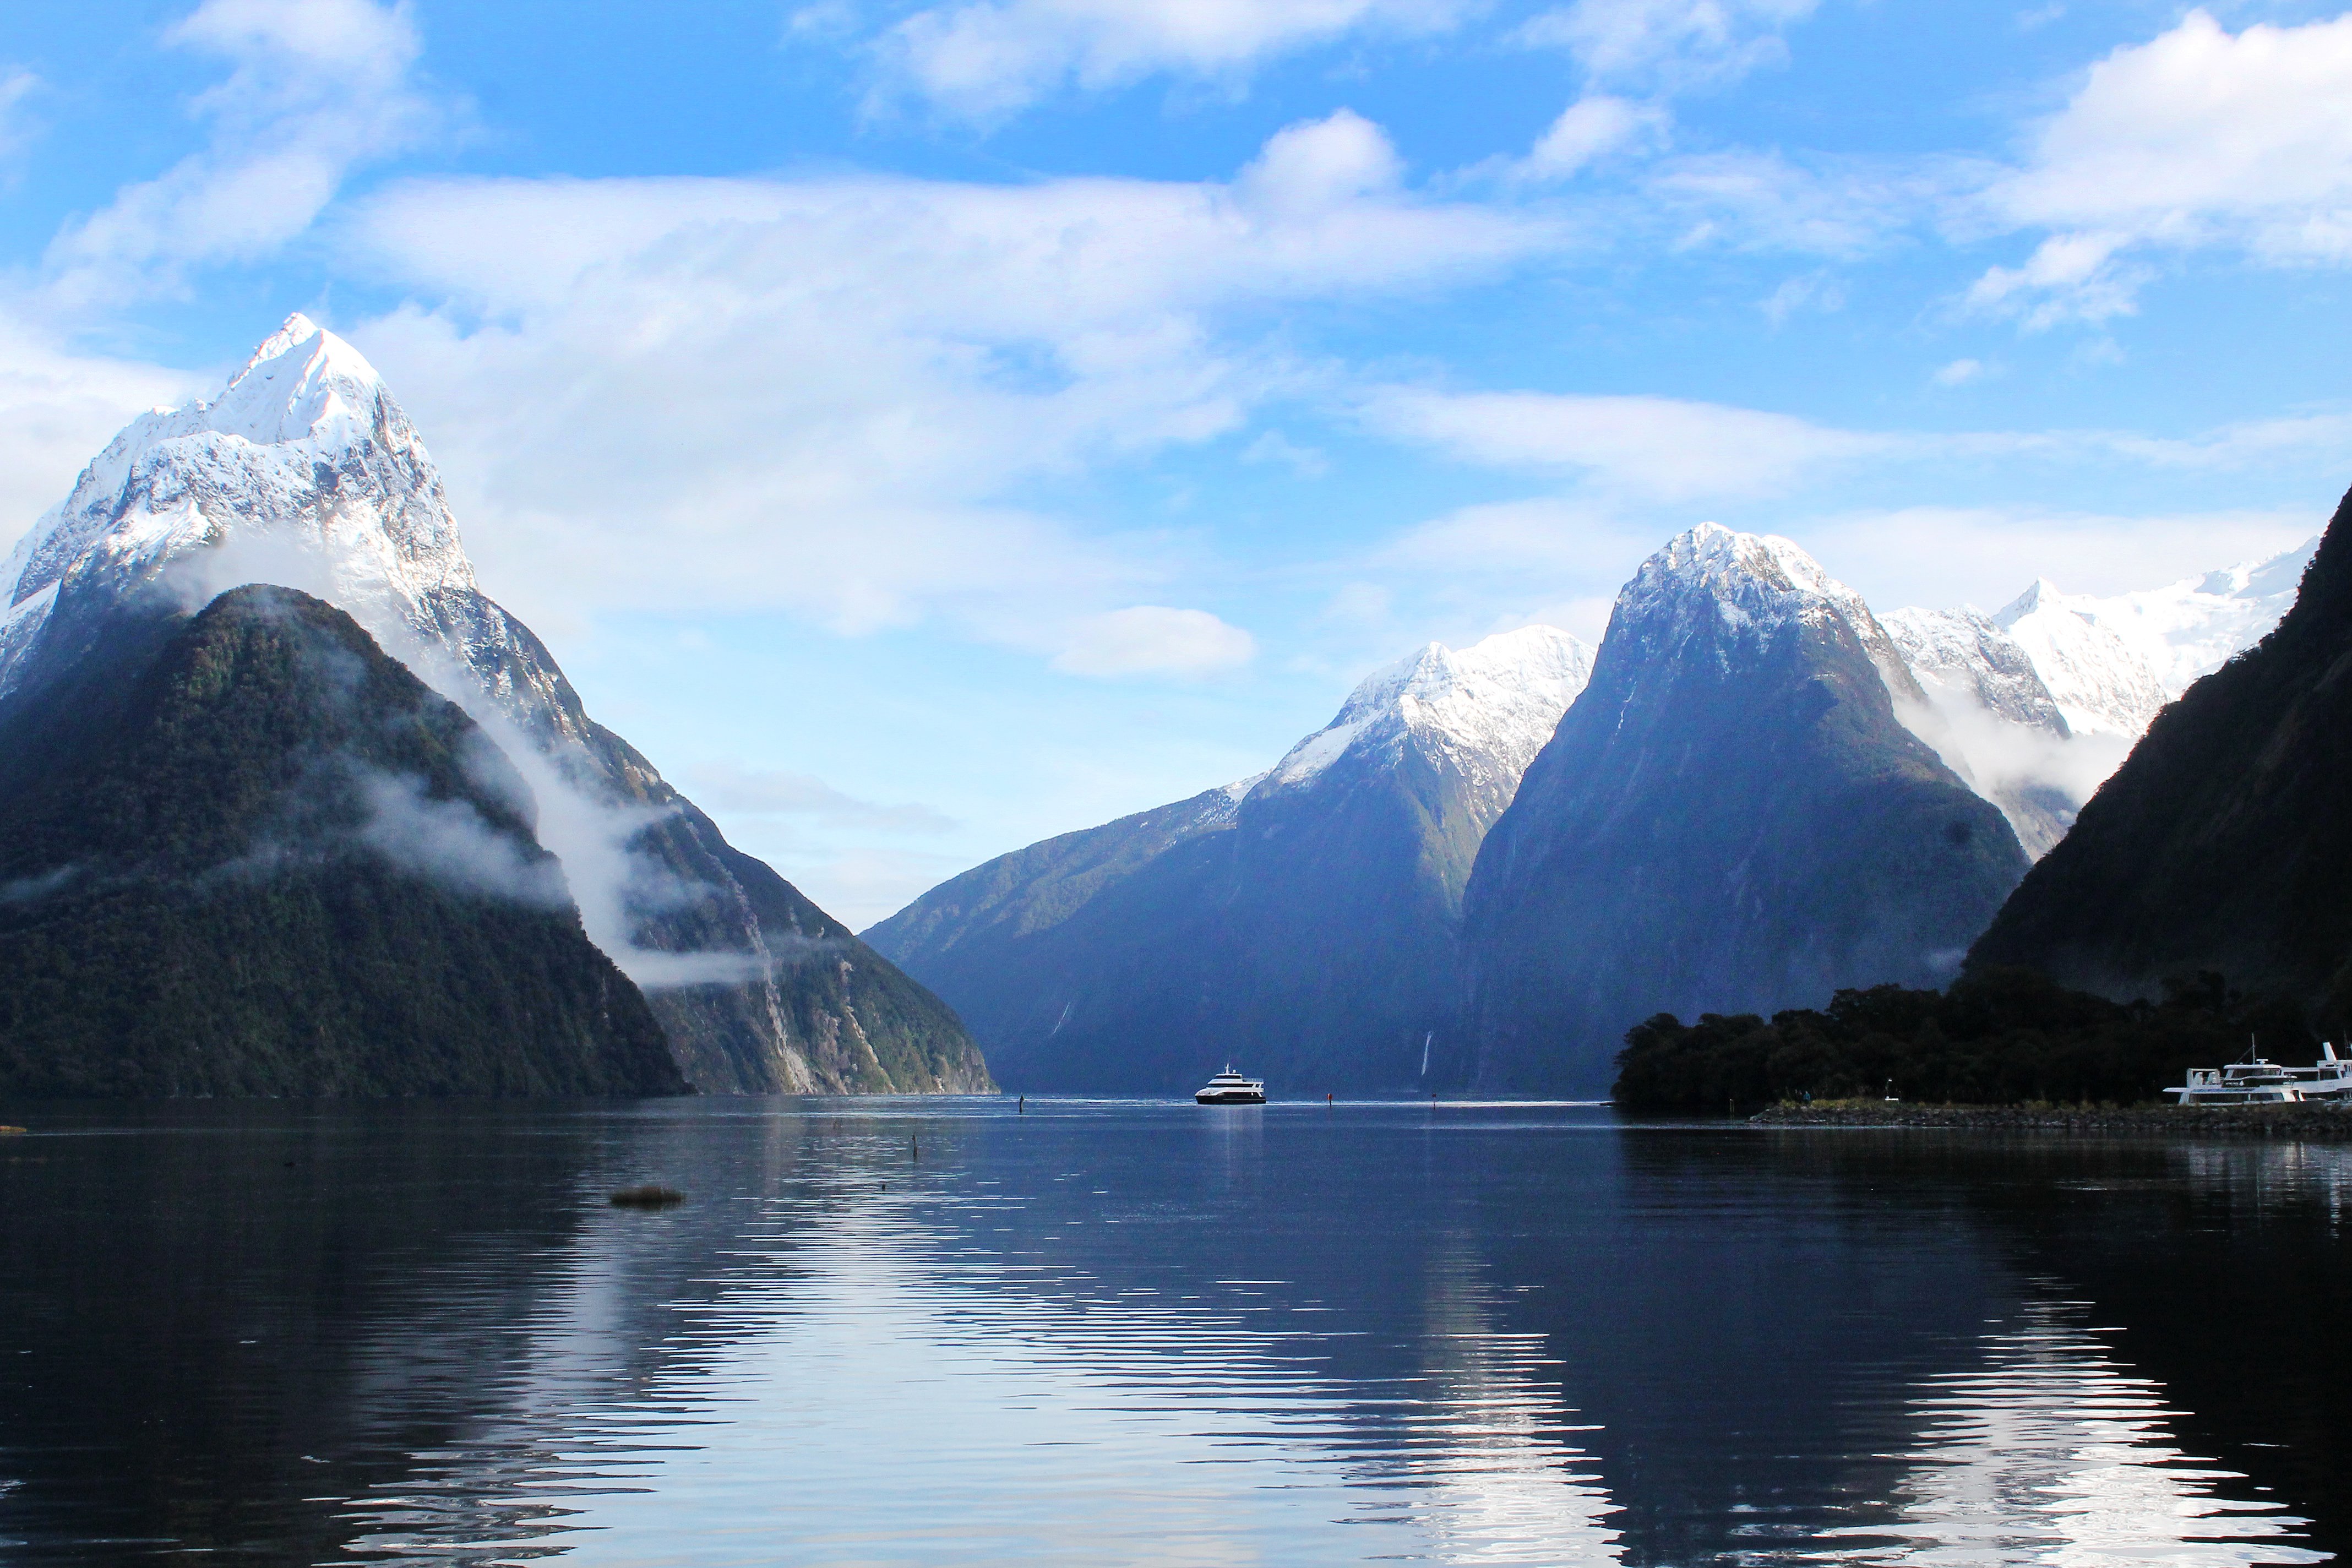 Milford Sound is seen as a jewel in the New Zealand tourist crown. PHOTO: LUISA GIRAO